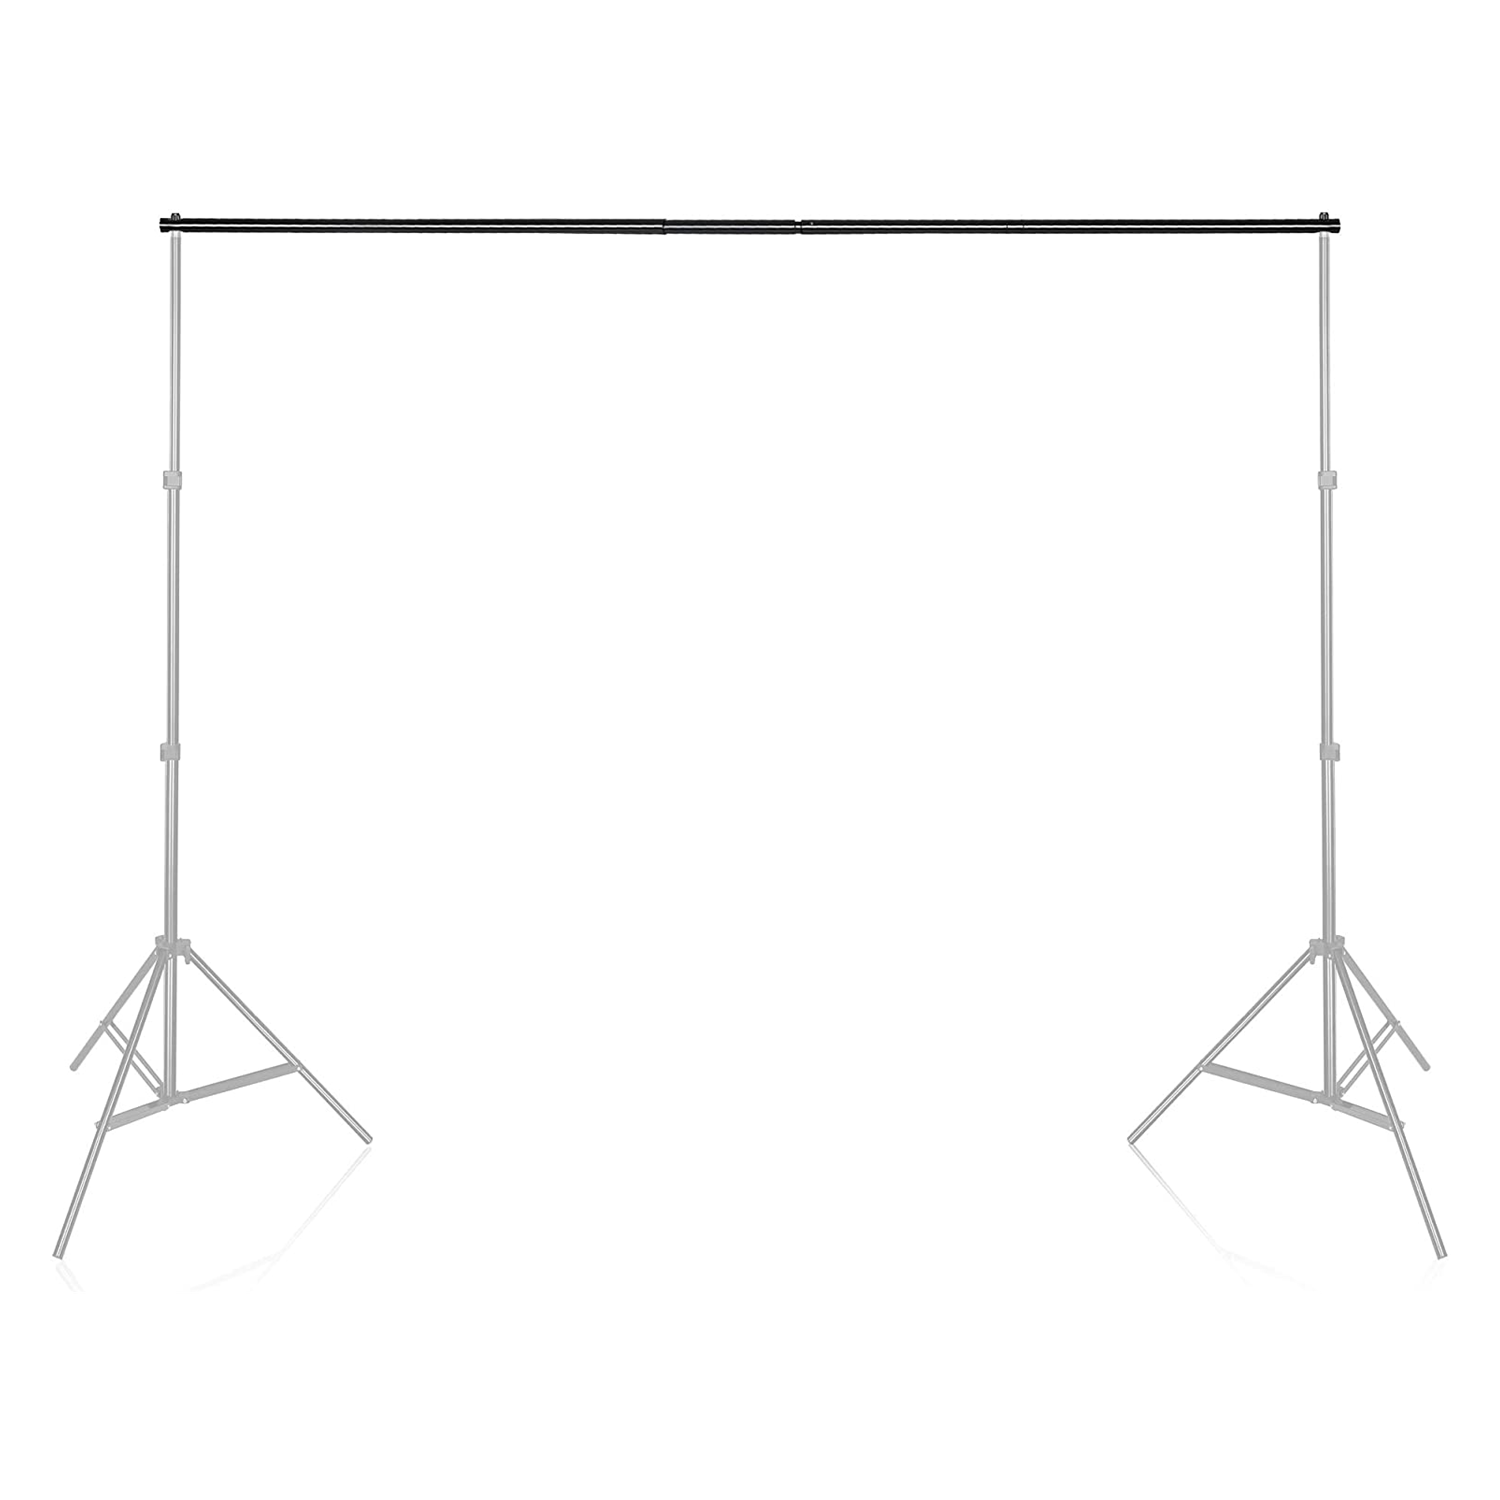 EMART Backdrop Support Stand Crossbar, Fit 1/4-inch Screw Tip Light Stands